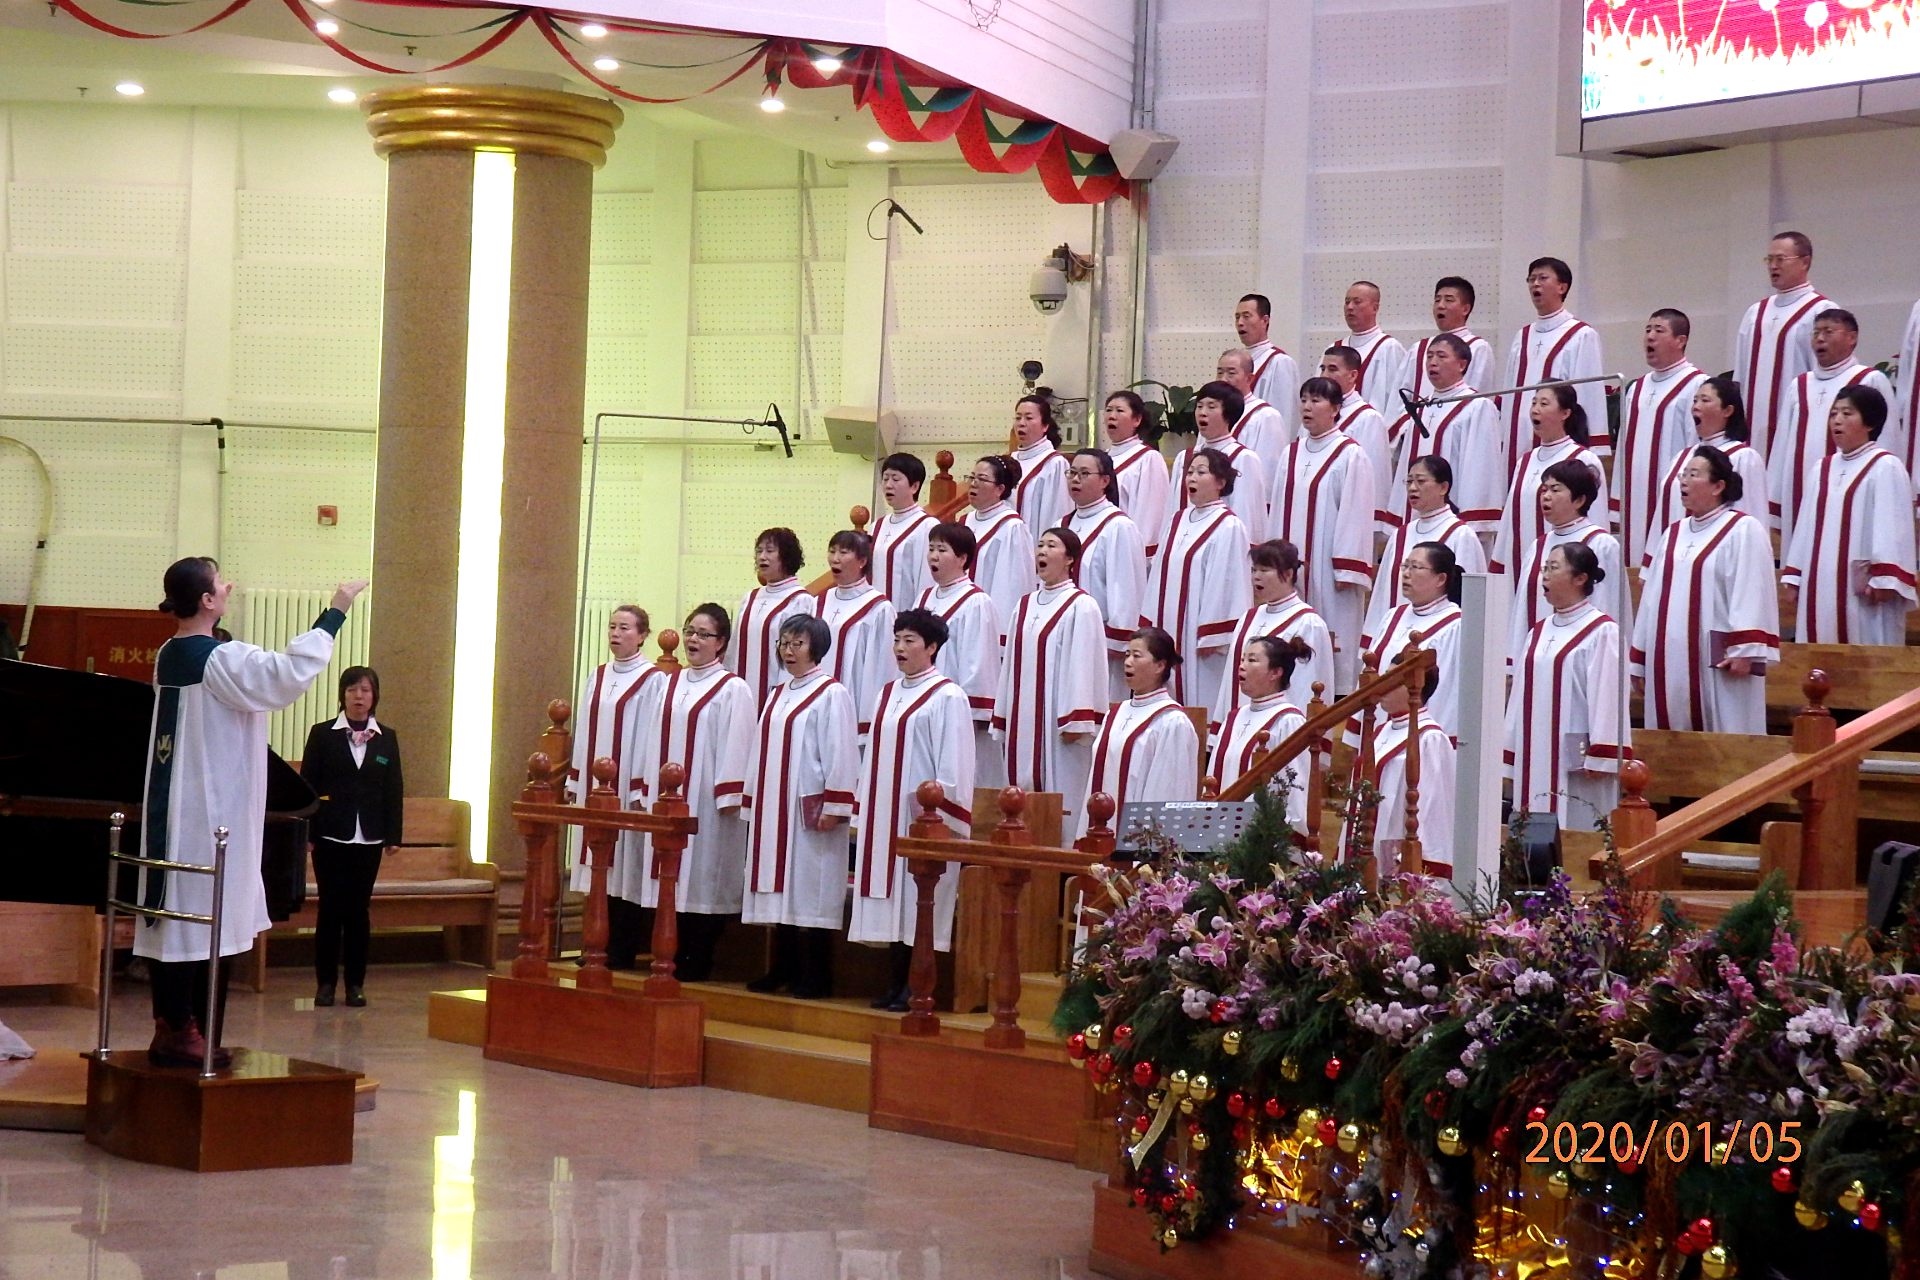 On Jan. 5, 2020, Dalian Fengshou Church, Liaoning held the first Sunday service of 2020. 